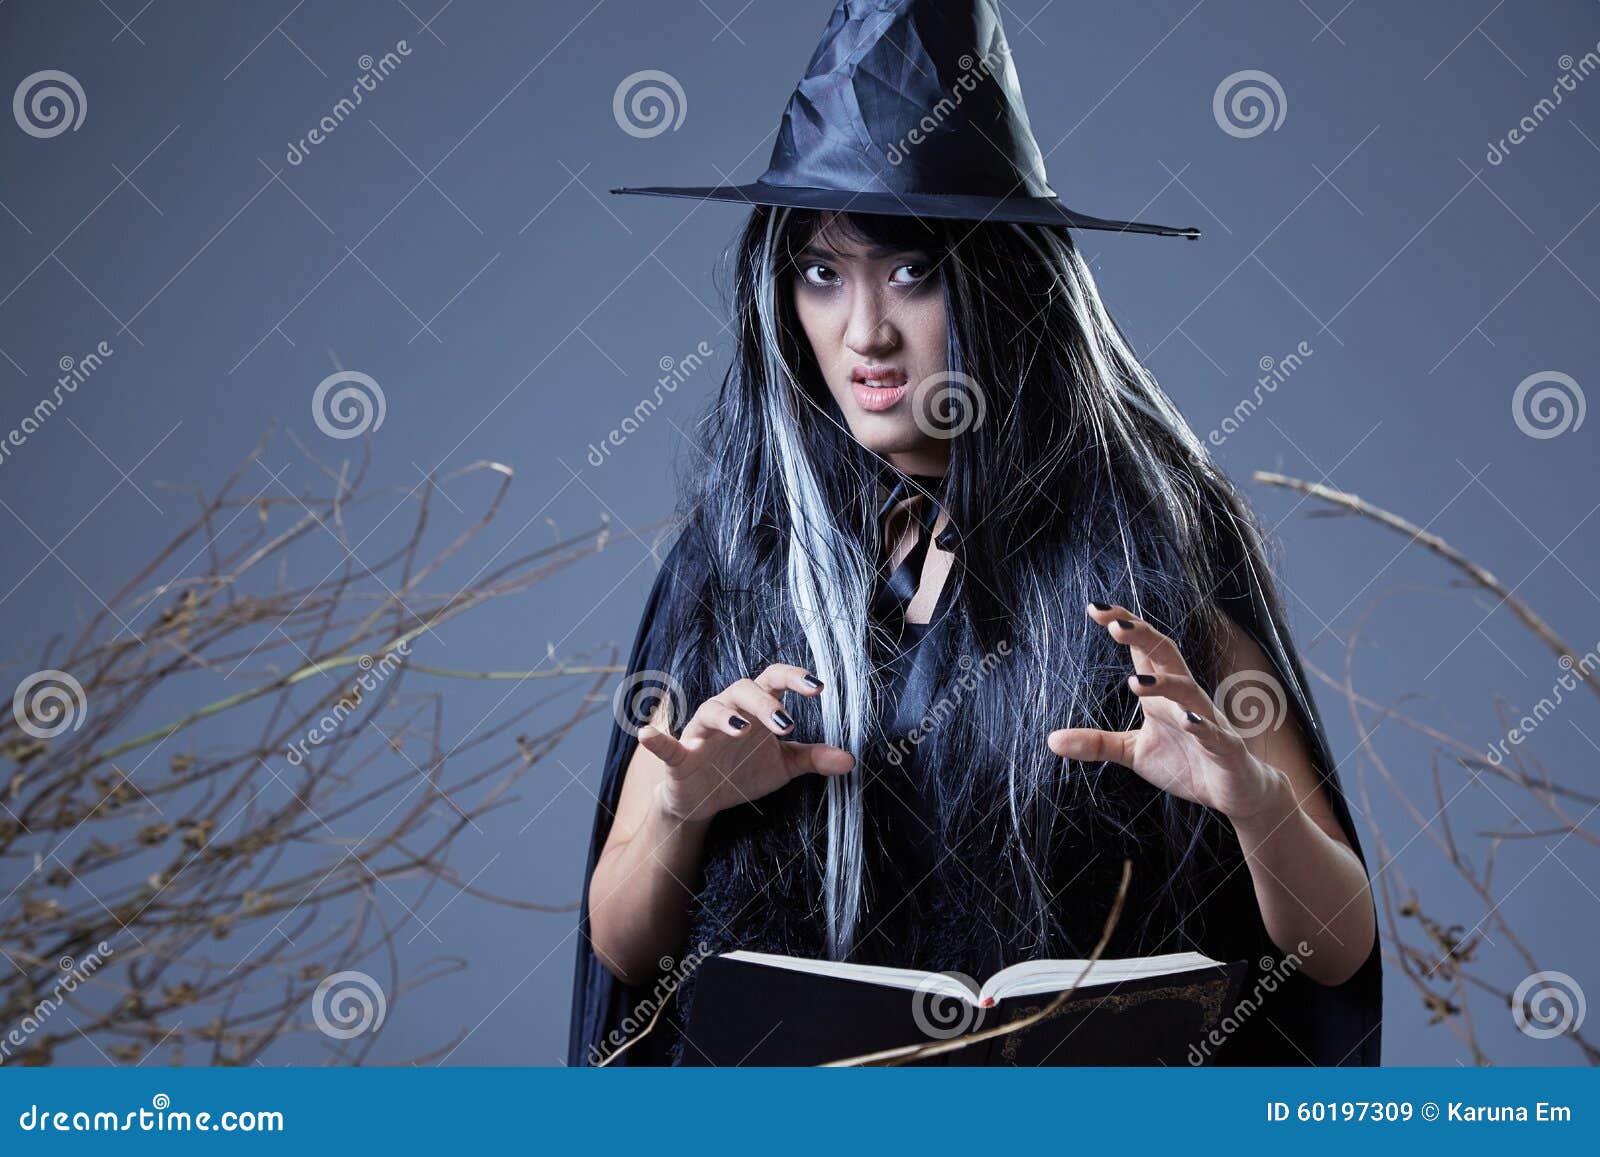 Witch Using Spell Book Stock Image Image Of Angry Wizard 60197309 